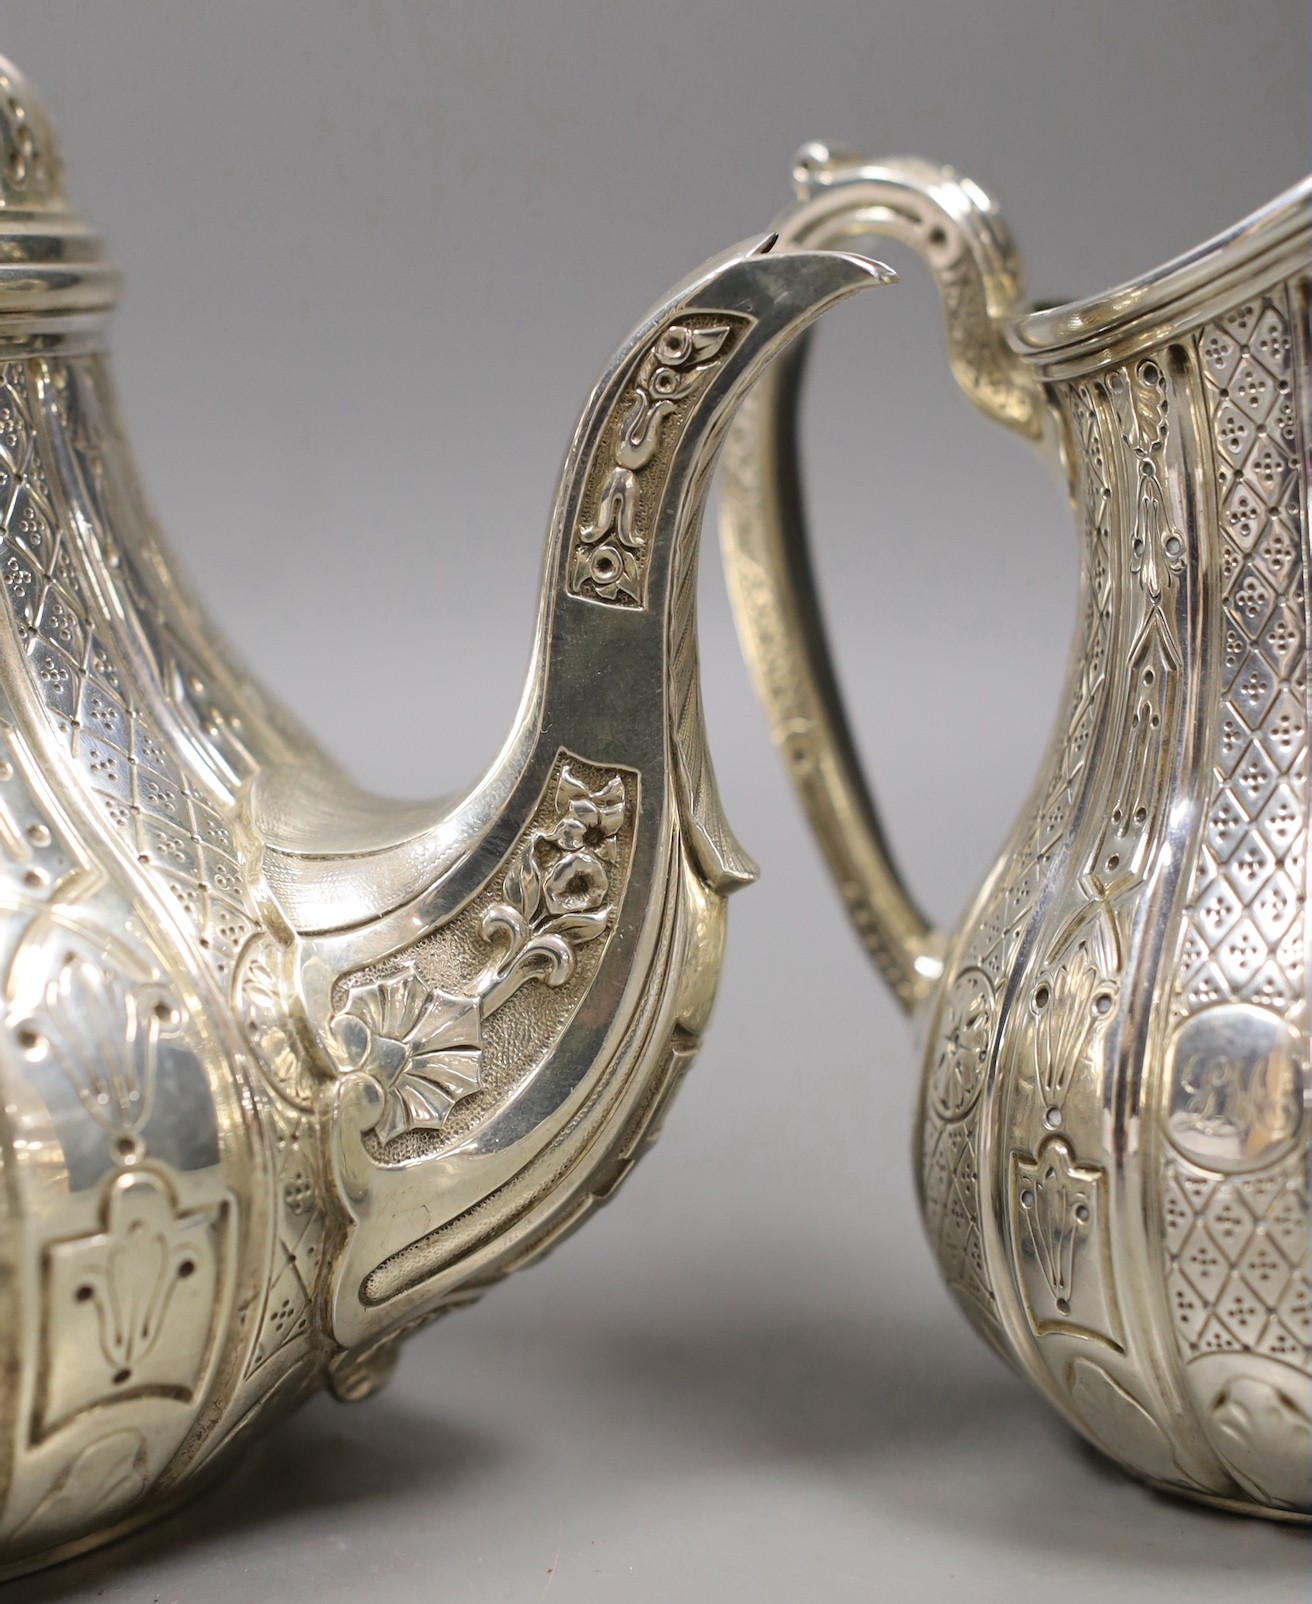 A Victorian engraved silver three piece tea set, of pear shape, by John Samuel Hunt (Hunt & Roskell late Storr & Mortimer), London, 1855/6, gross weight 45.4oz, together with original catalogue and purchase receipt, date